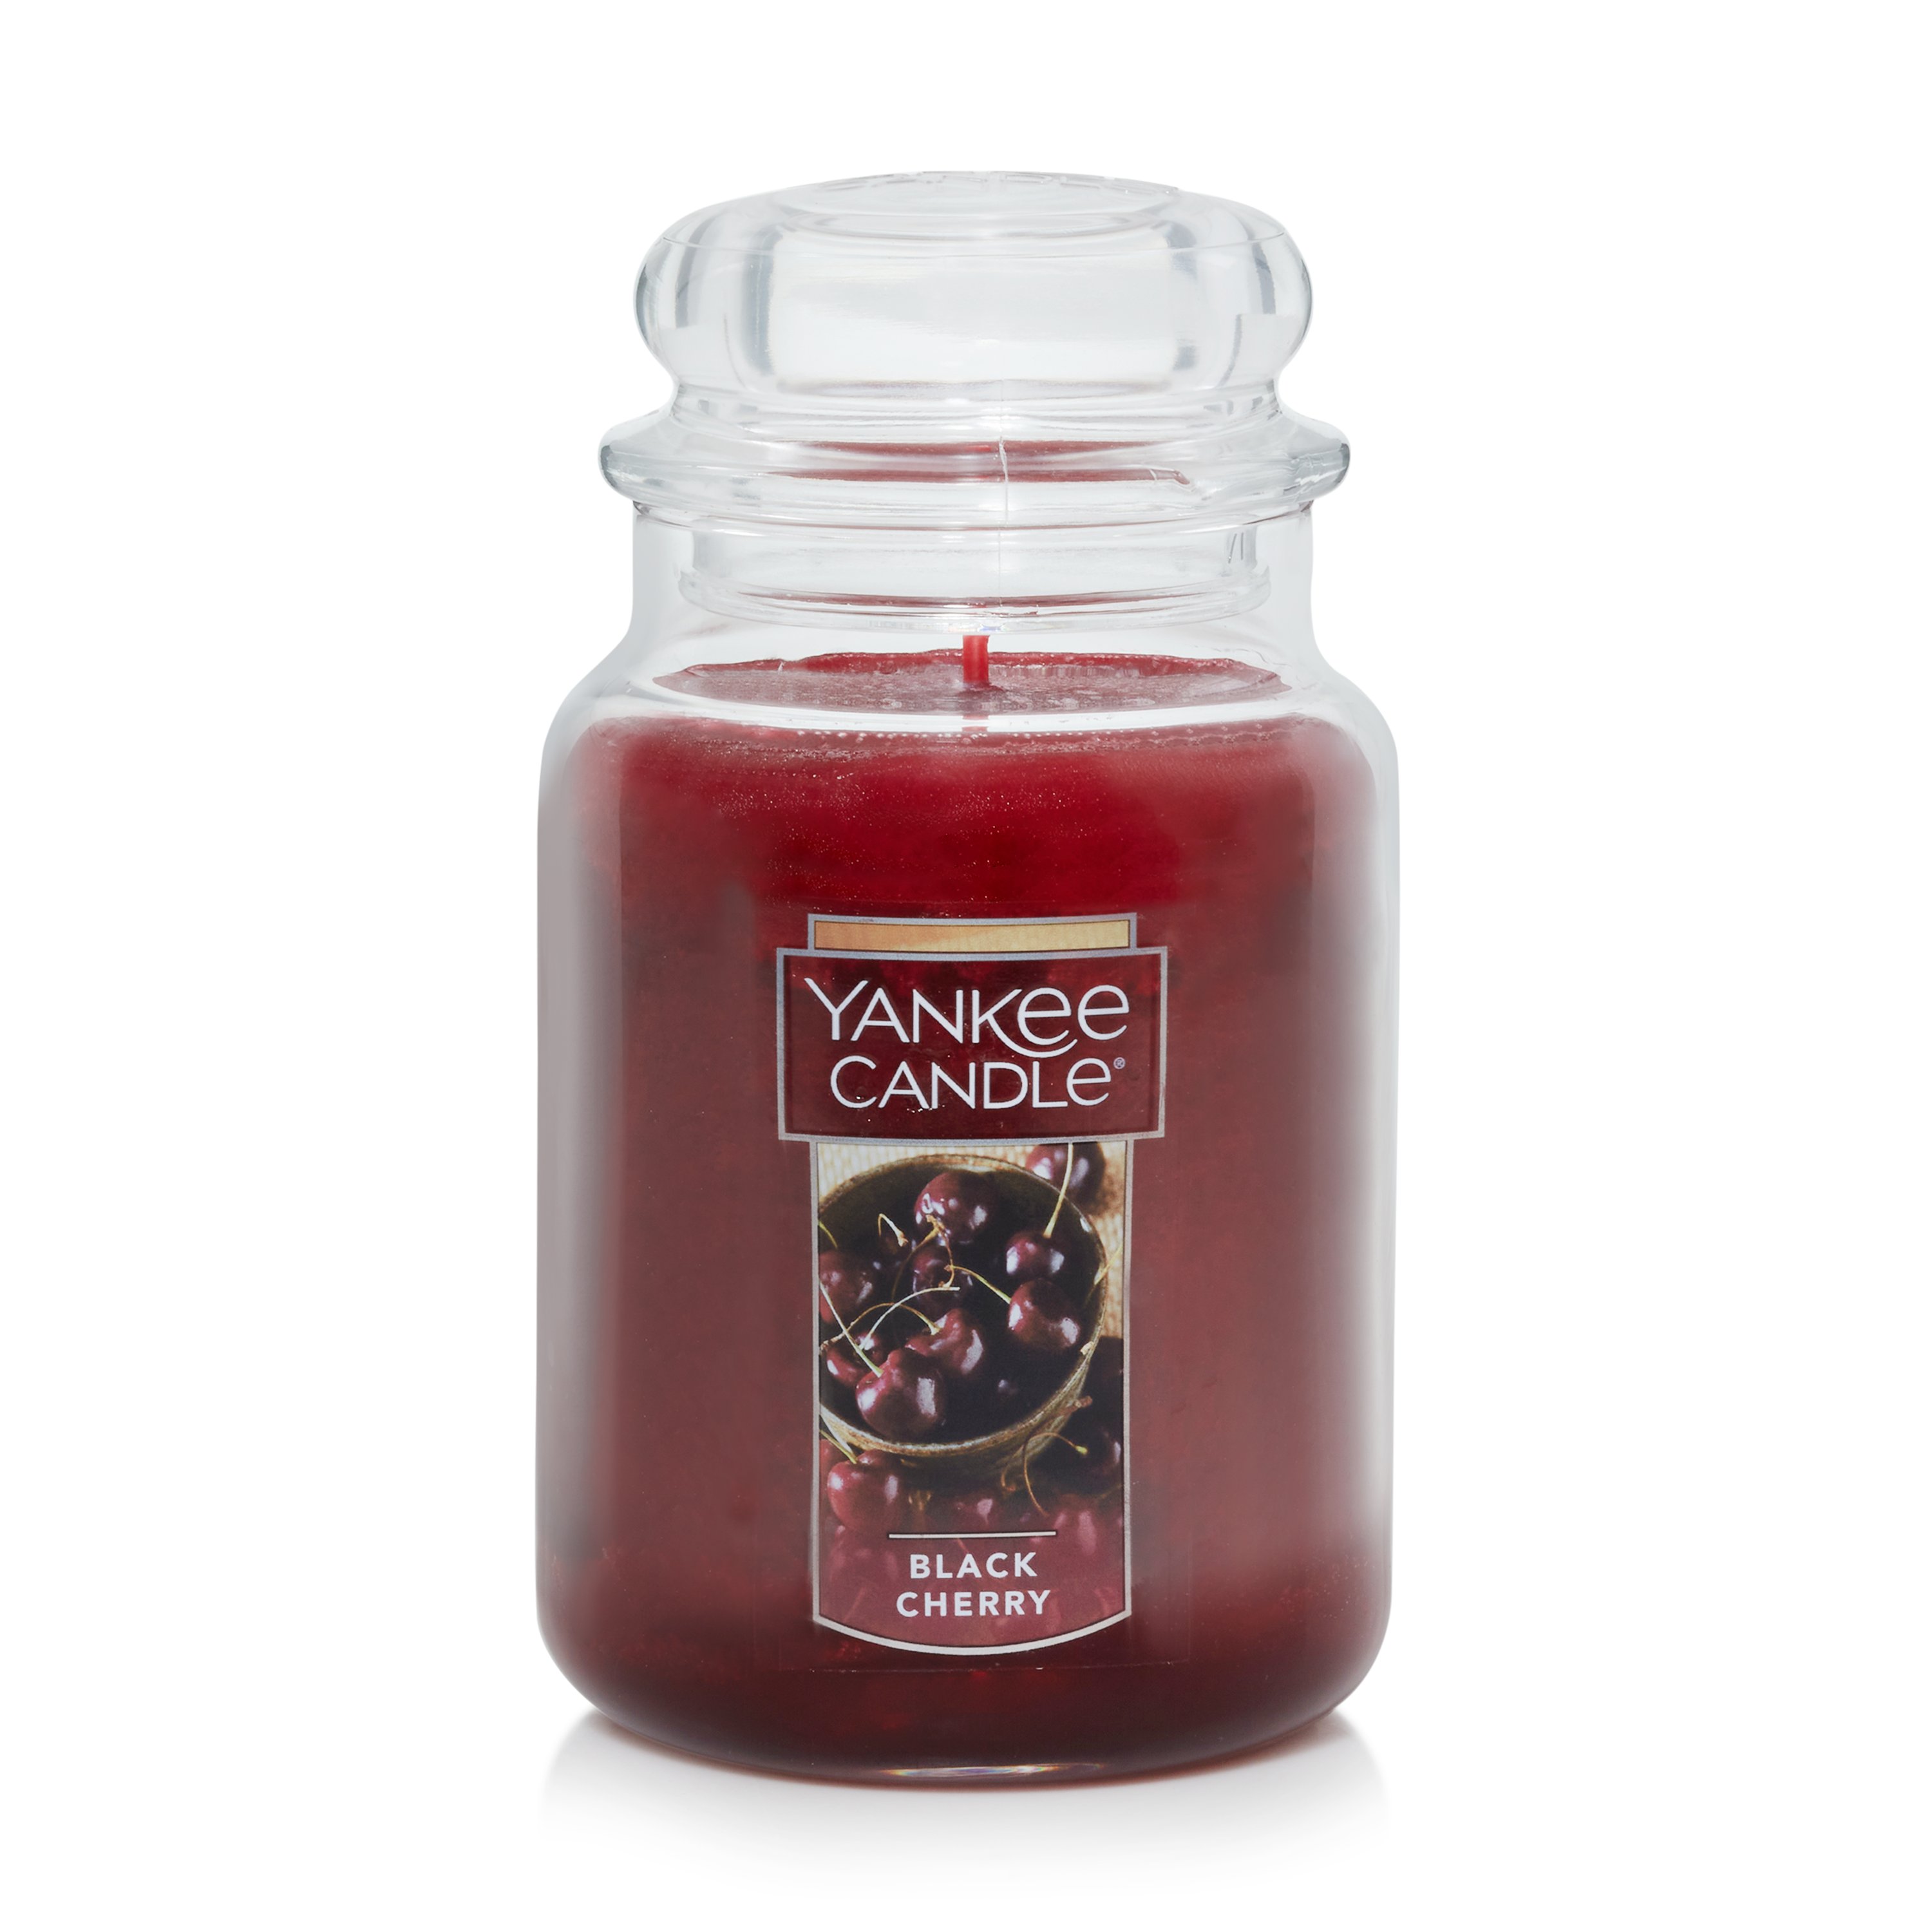 Yankee Candle is 50% off on  ahead of Black Friday